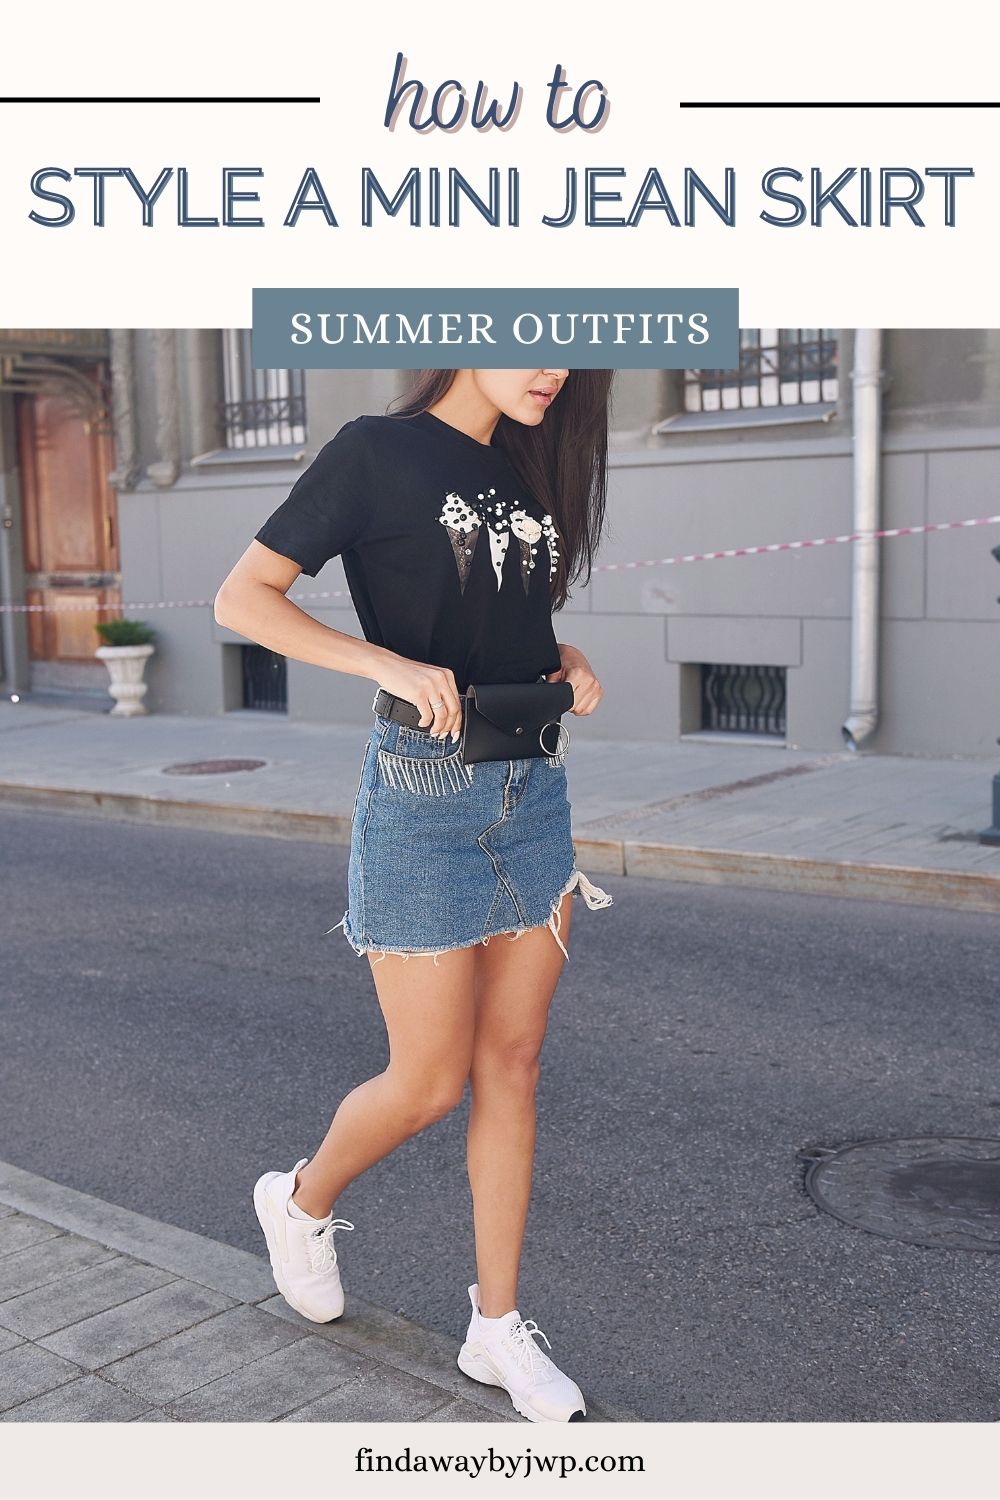 Mini jean skirt outfit ideas - Fashion - Find A Way by JWP